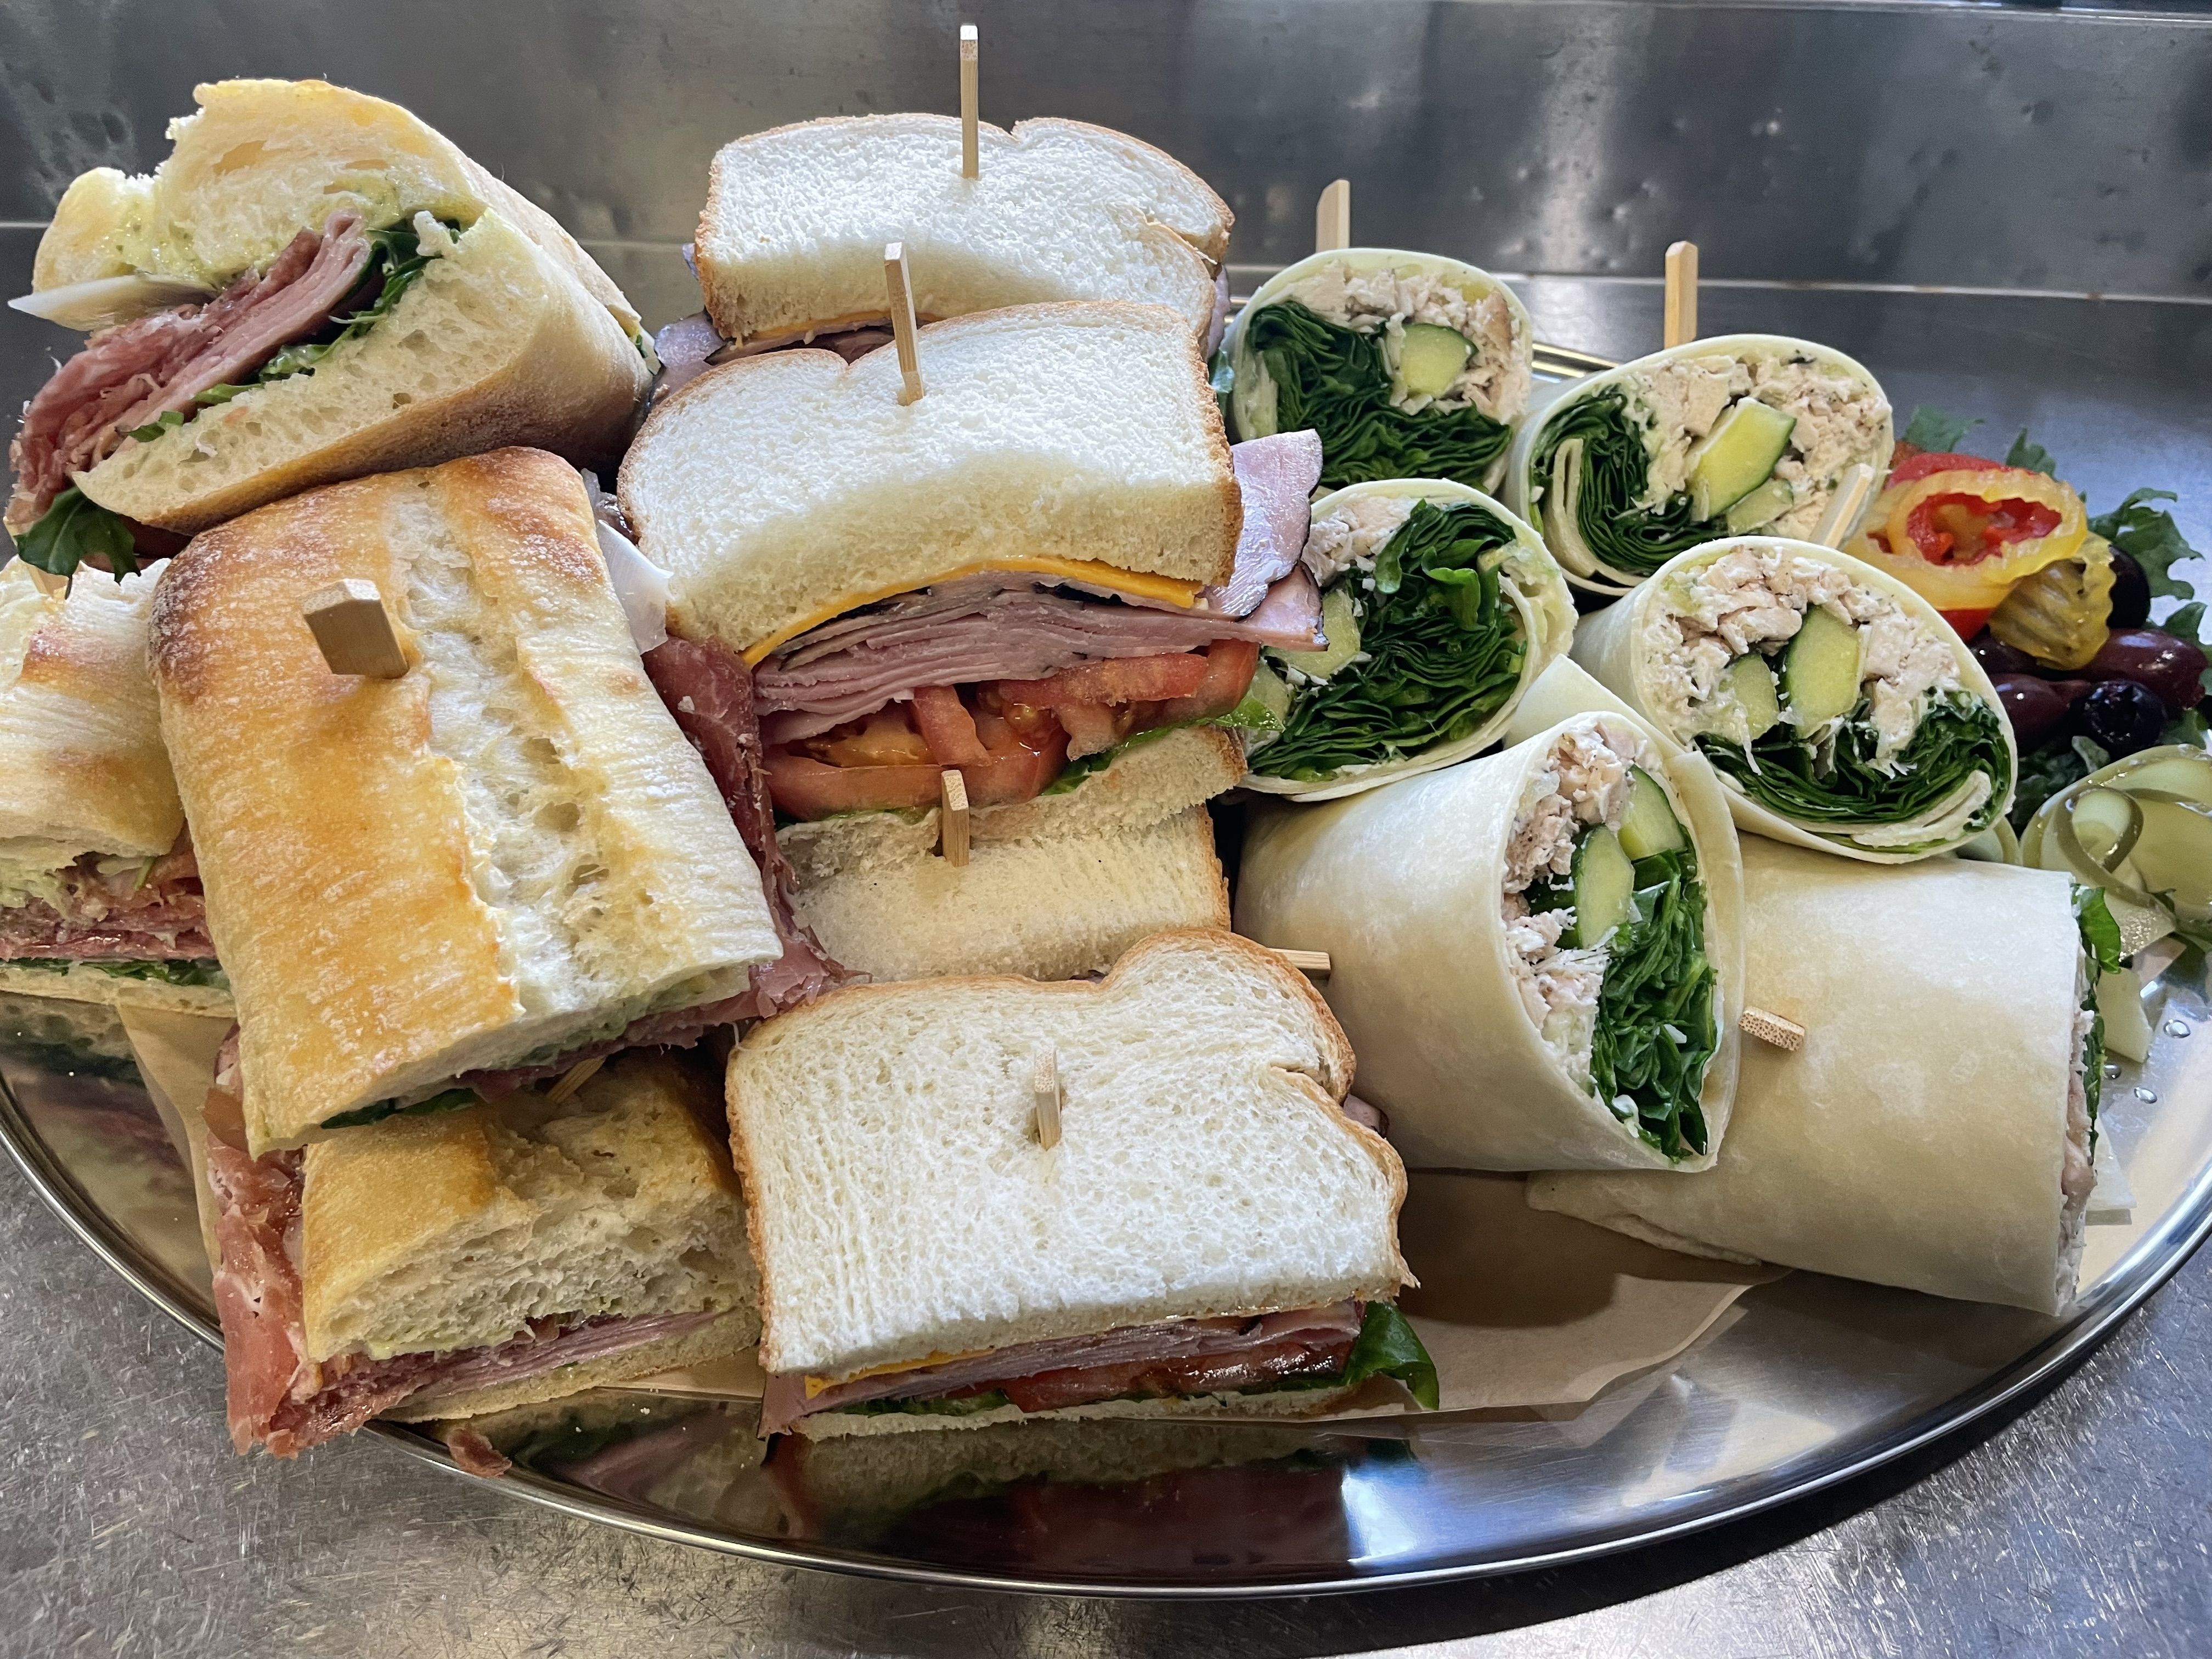 Cold Sandwiches and Wraps Platter-  Medium